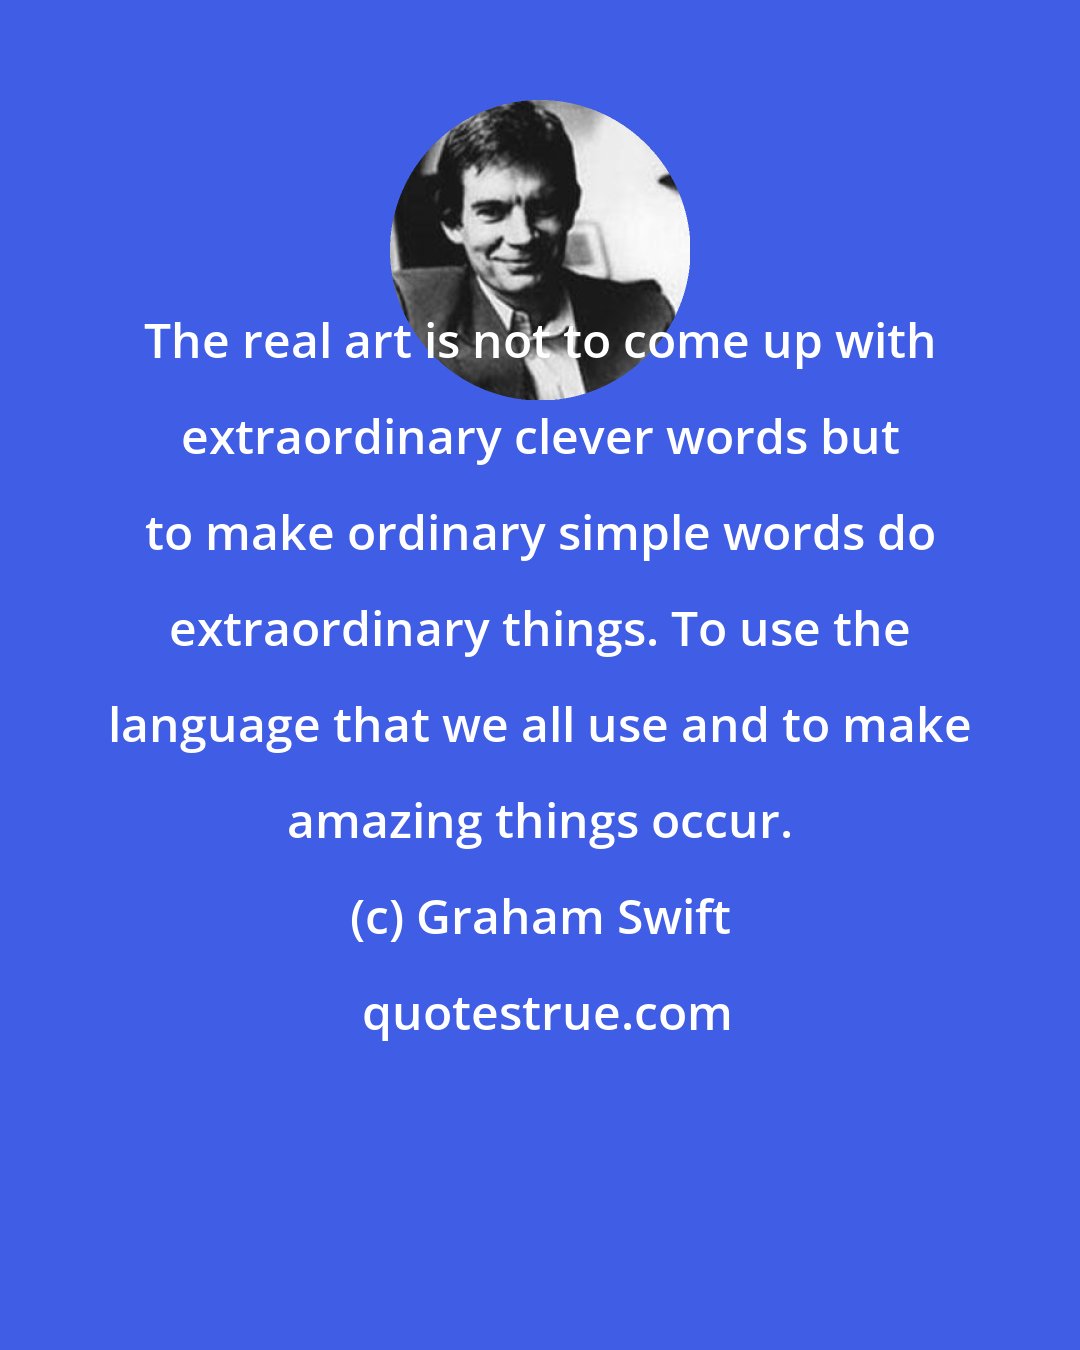 Graham Swift: The real art is not to come up with extraordinary clever words but to make ordinary simple words do extraordinary things. To use the language that we all use and to make amazing things occur.